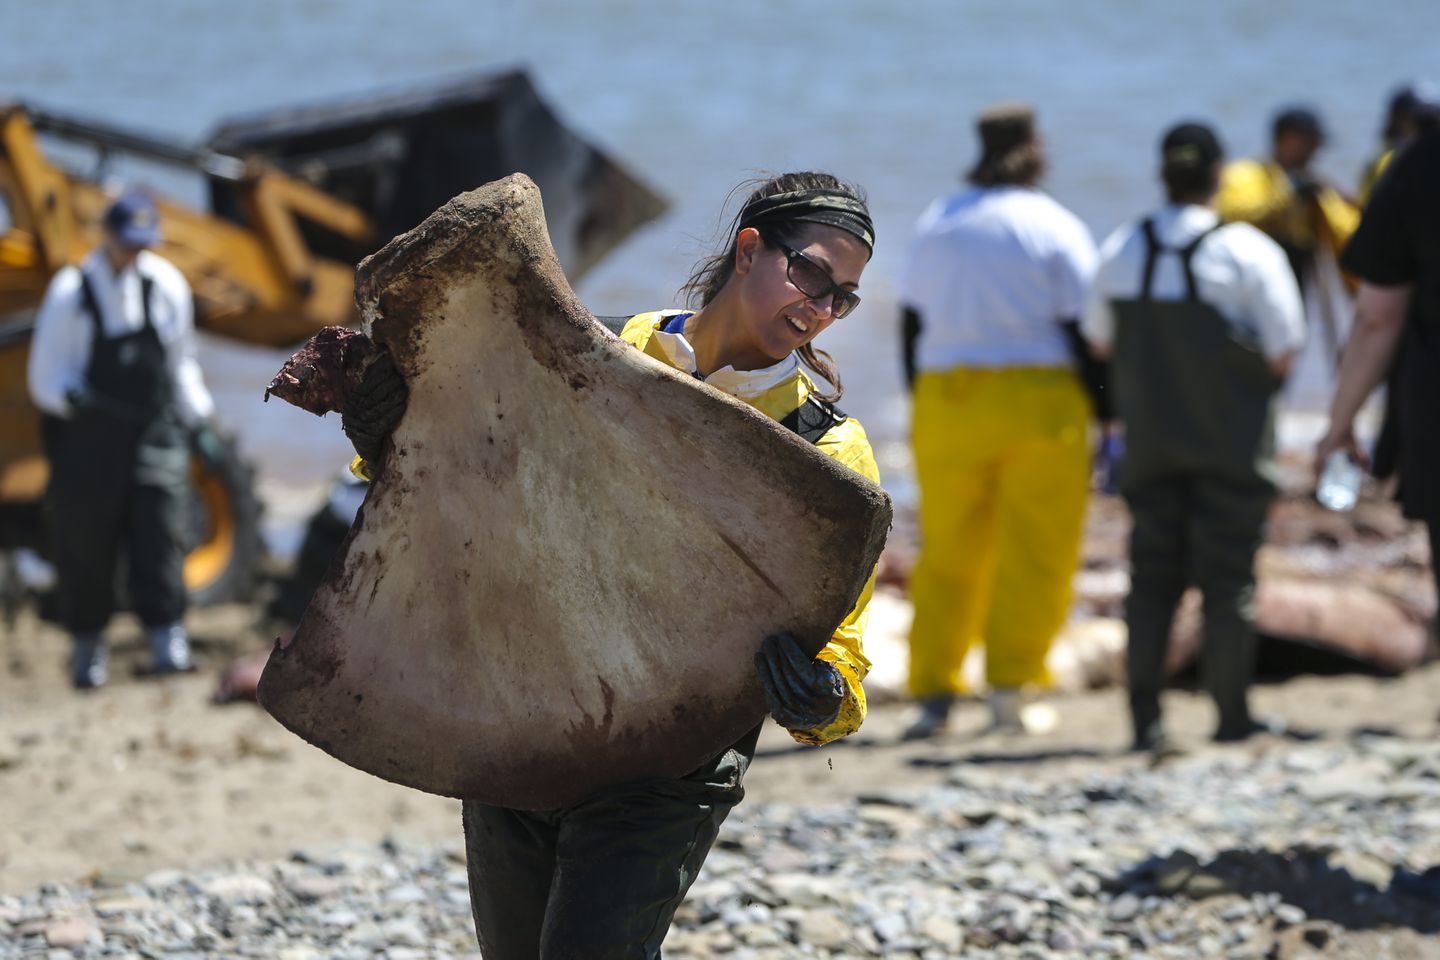 A scientist carried away the right whale’s shoulder blade during the necropsy. Image by Nathan Klima. Canada, 2019.